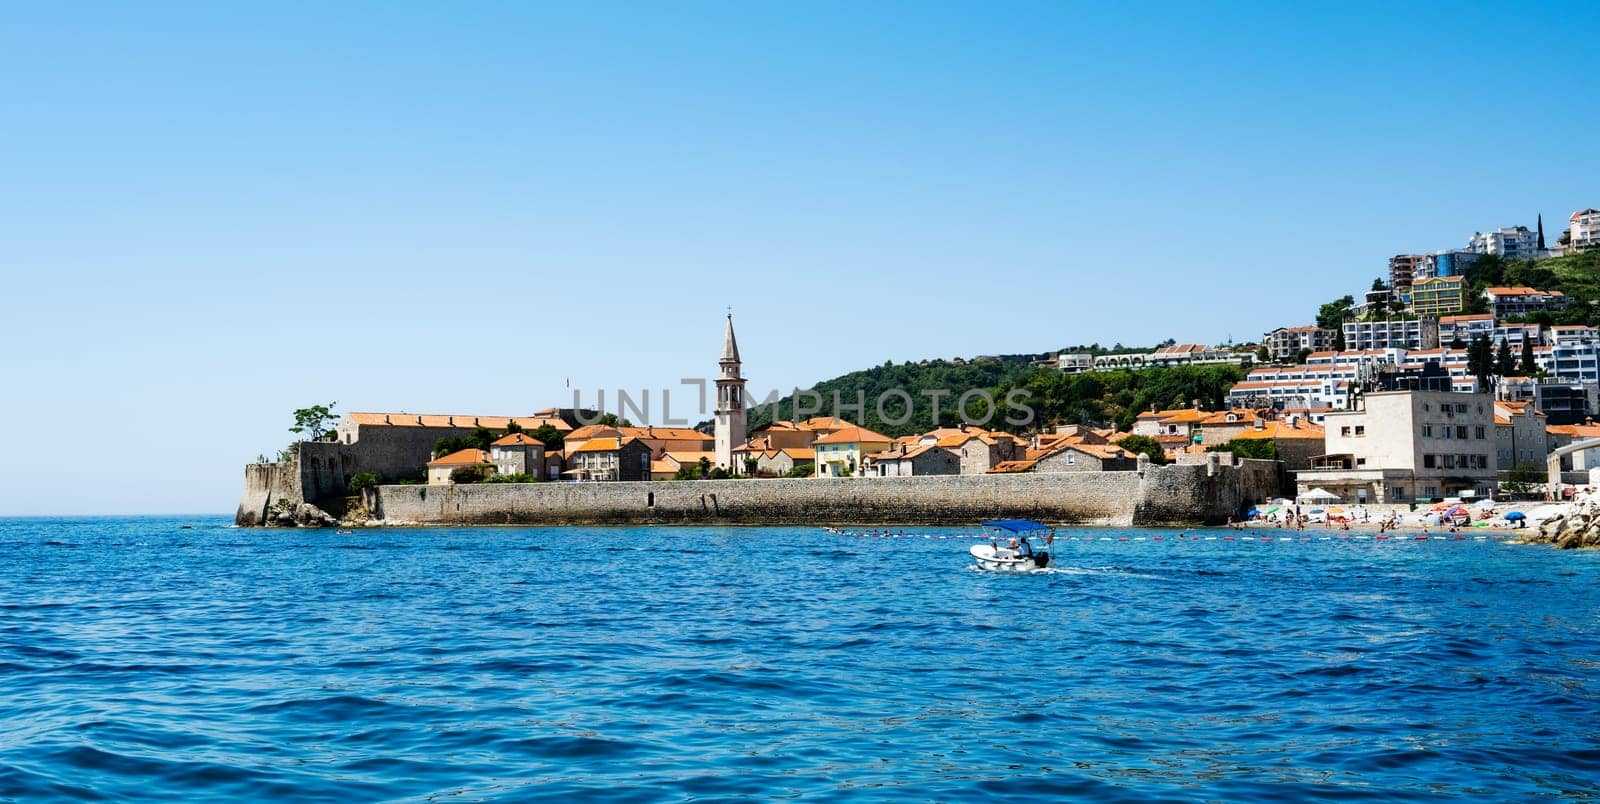 Montenegro city view with old buildings from Adriatic sea. Ancient Mediterranean architecture with mountains and beautiful nature